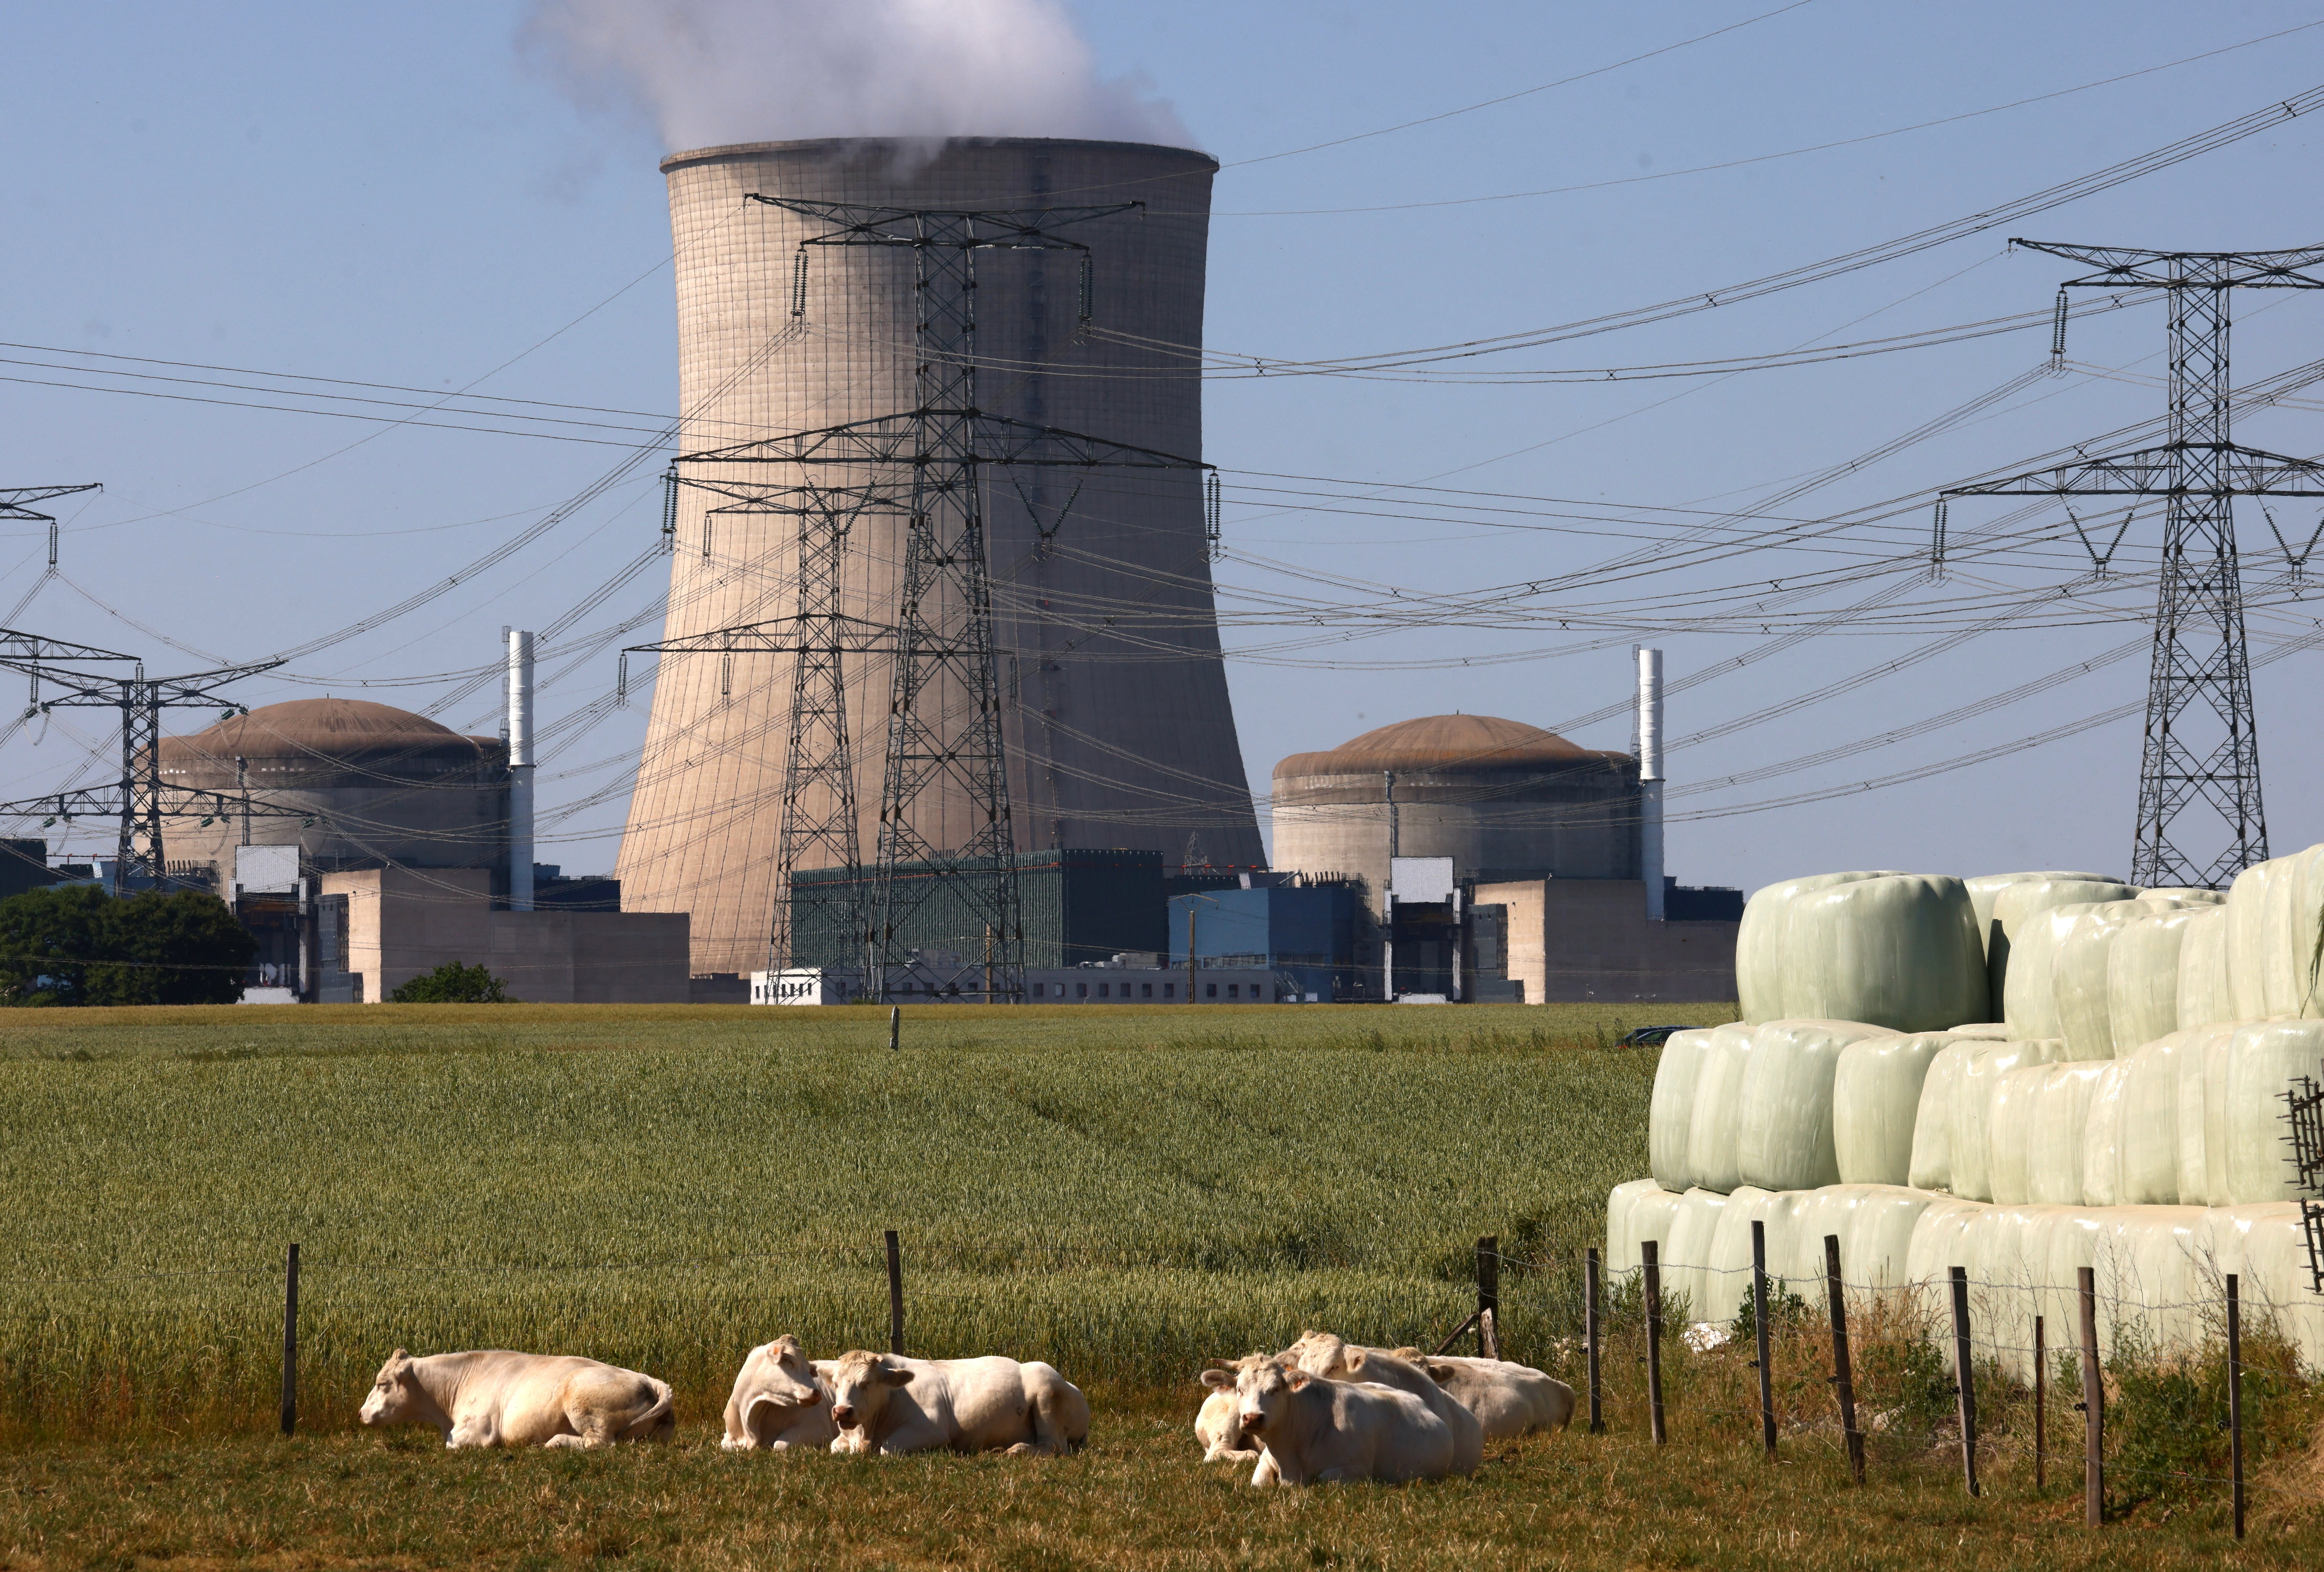 A general view shows the Electricite de France (EDF) nuclear power plant in Cattenom